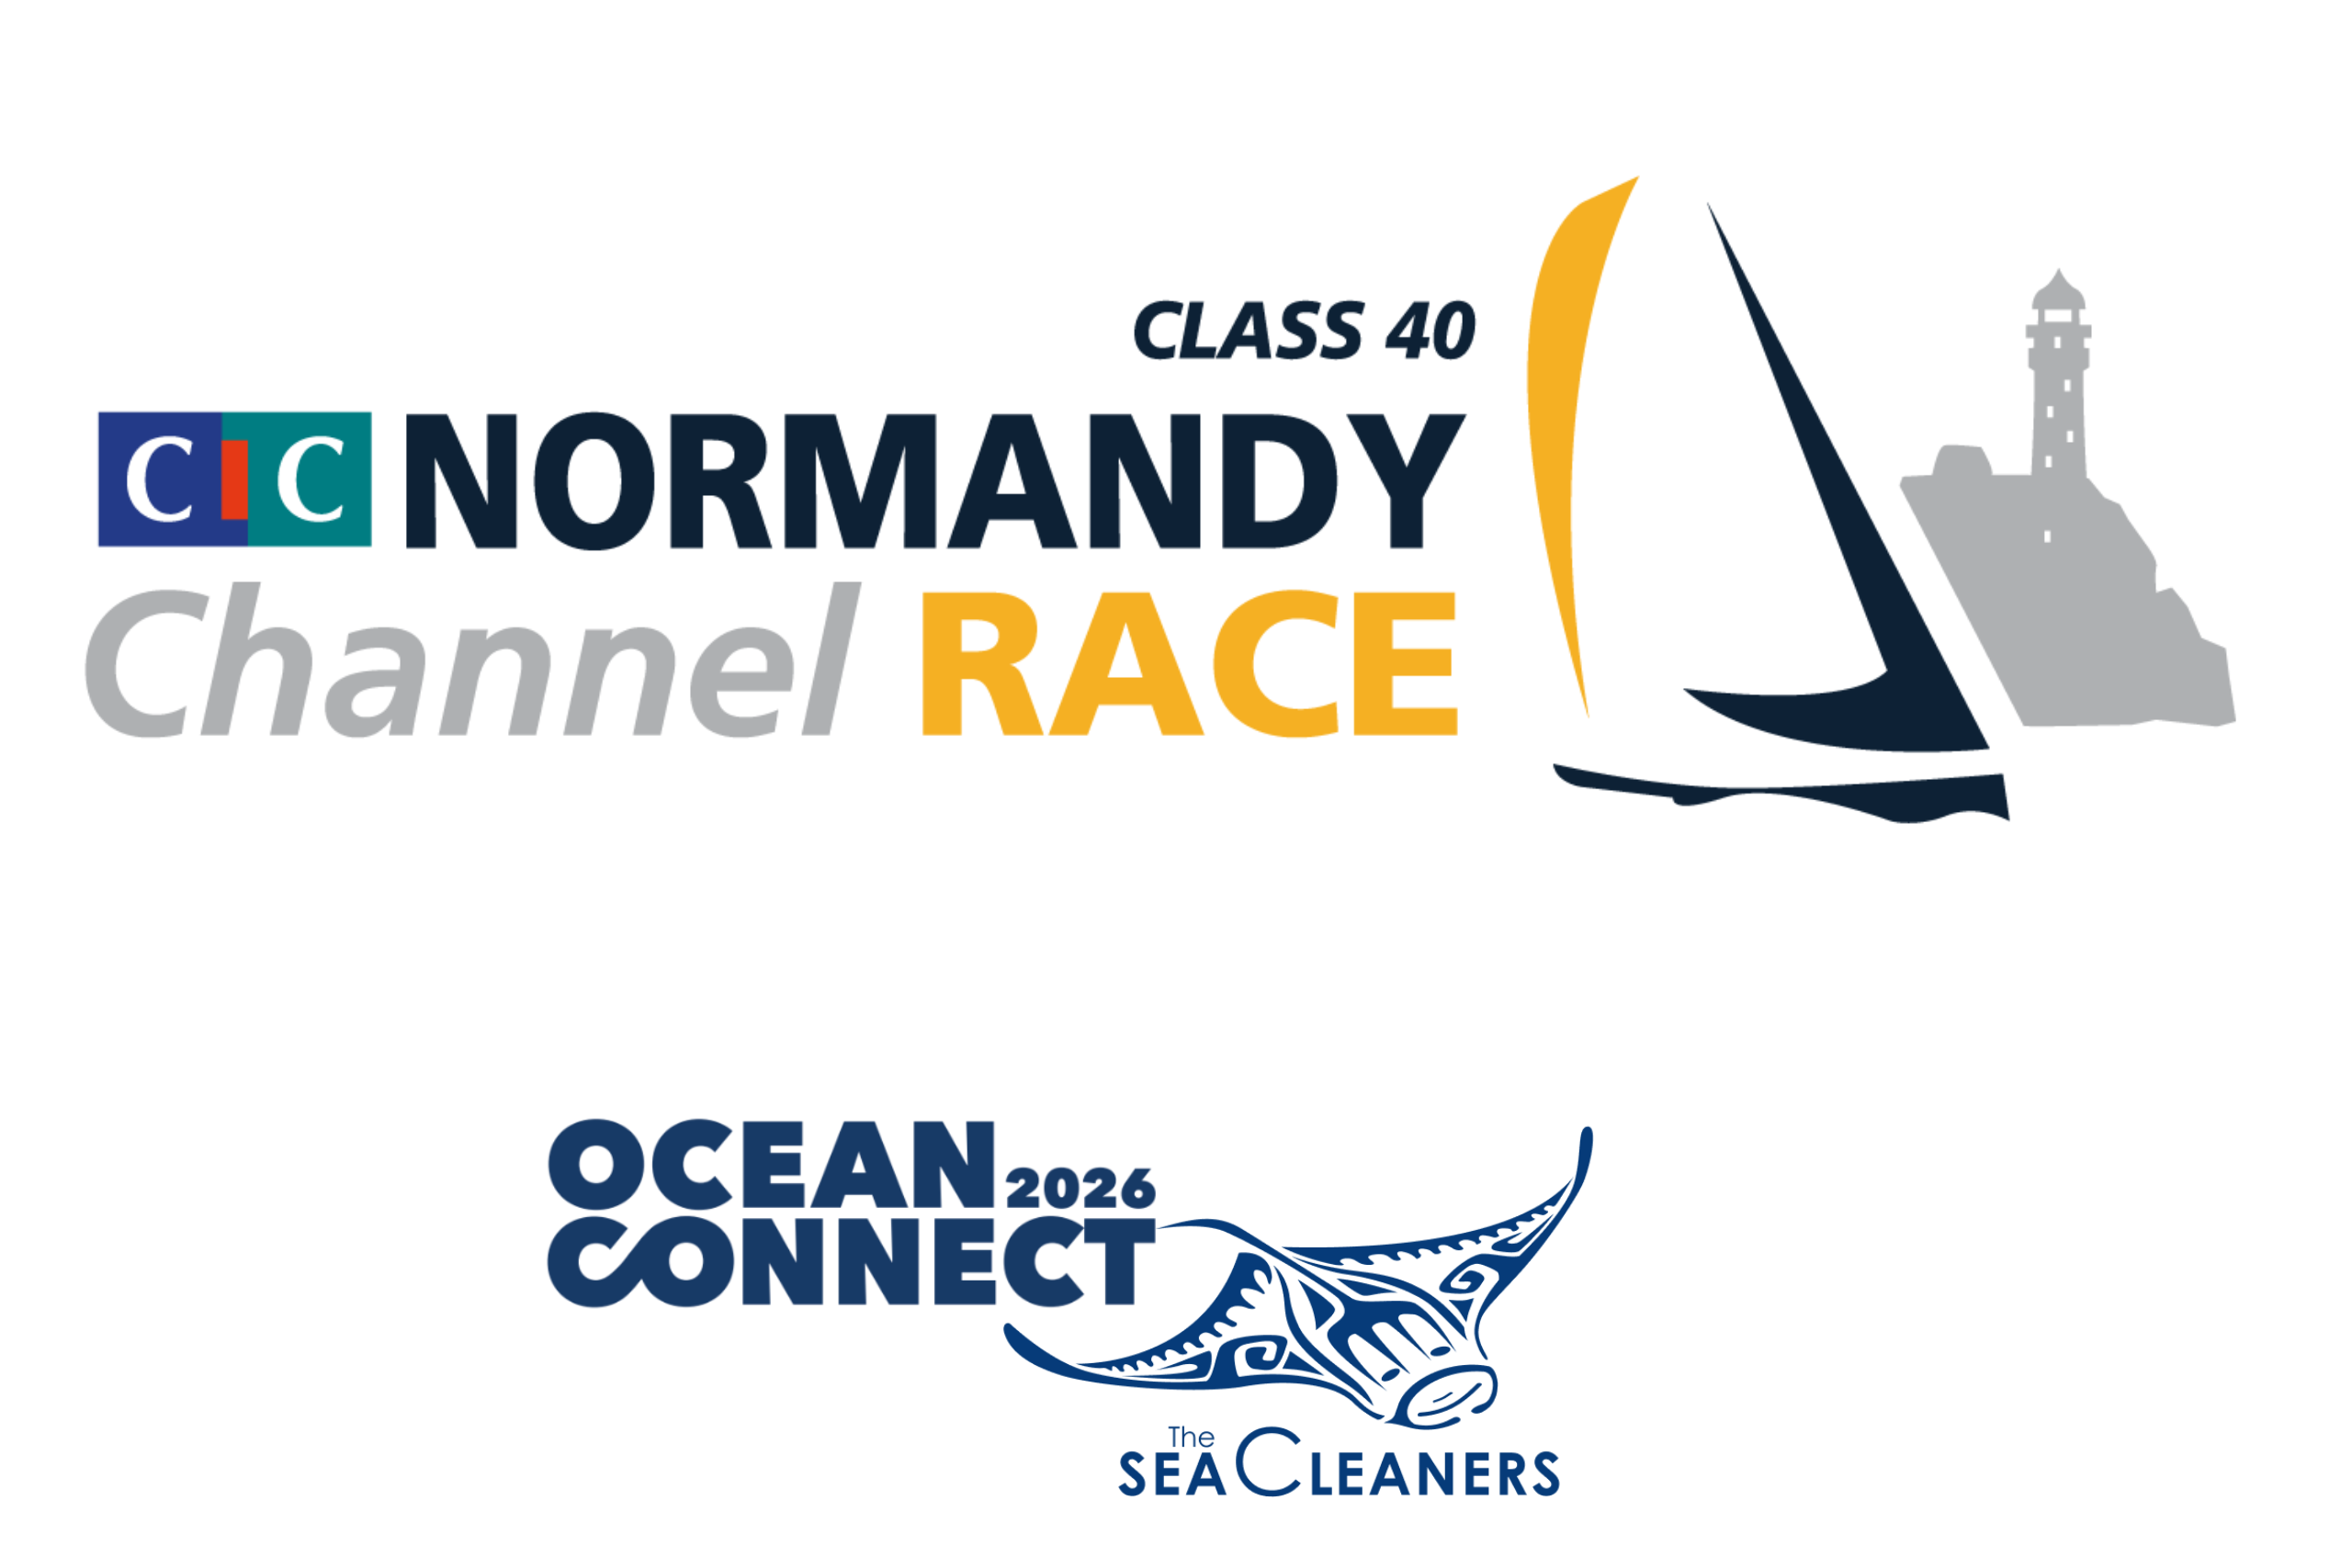 CIC normandy channel race